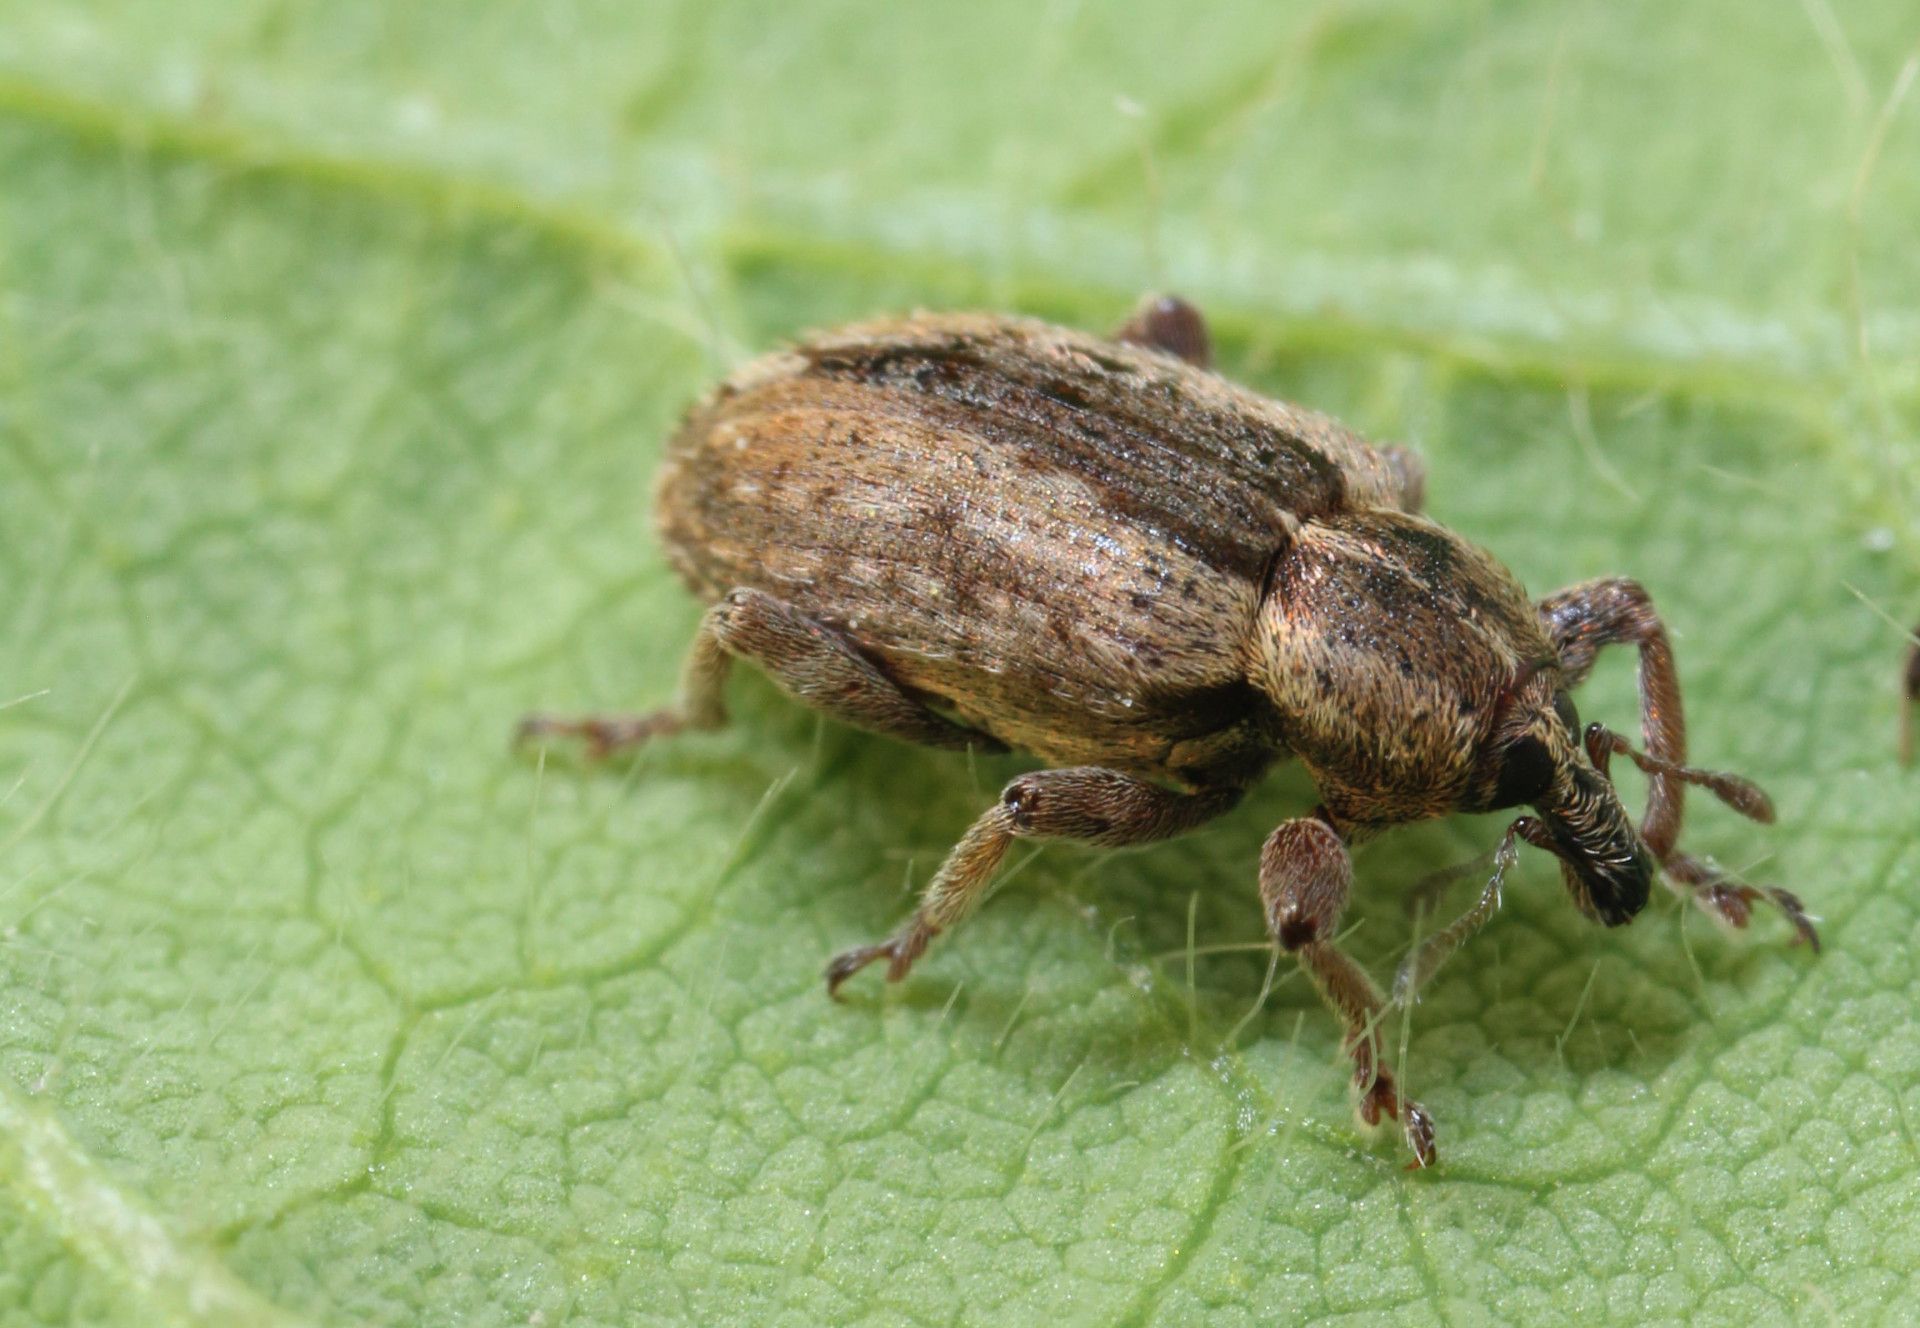 https://cropprotectionnetwork.org/image?s=%2Fimg%2Fhttp%2Fgeneral%2Falfalfa-weevil-Adam-ssson.jpg%2Feb9eea41441c18a88f54f160add2487d.jpg&h=0&w=316&fit=contain